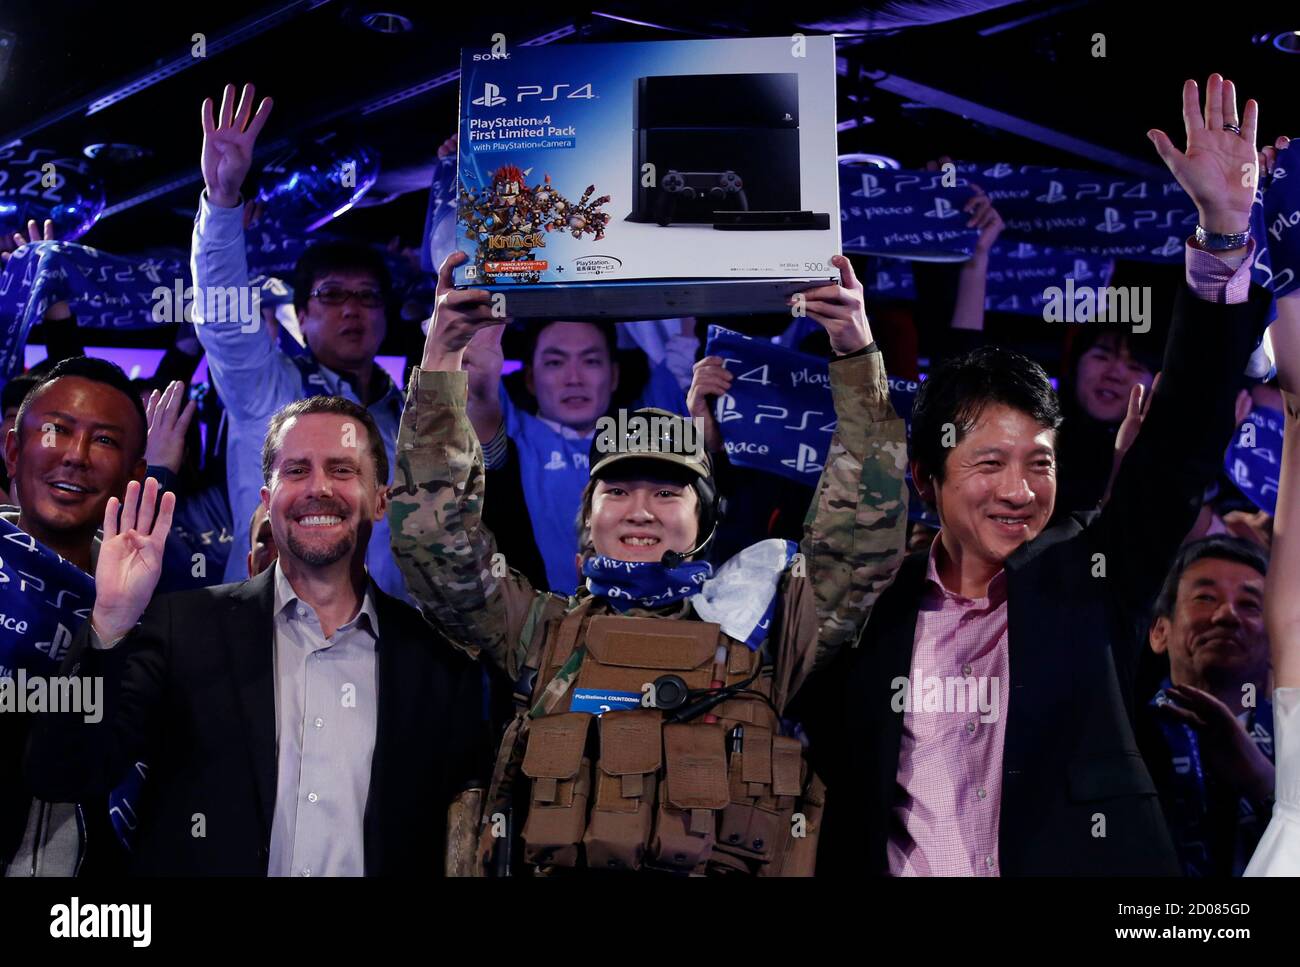 Ryo Watanabe C 21 Holds Up His Playstation 4 Game Console After Being The First In Japan To Own The Gaming Console Next To Sony Computer Entertainment Inc President And Group Ceo